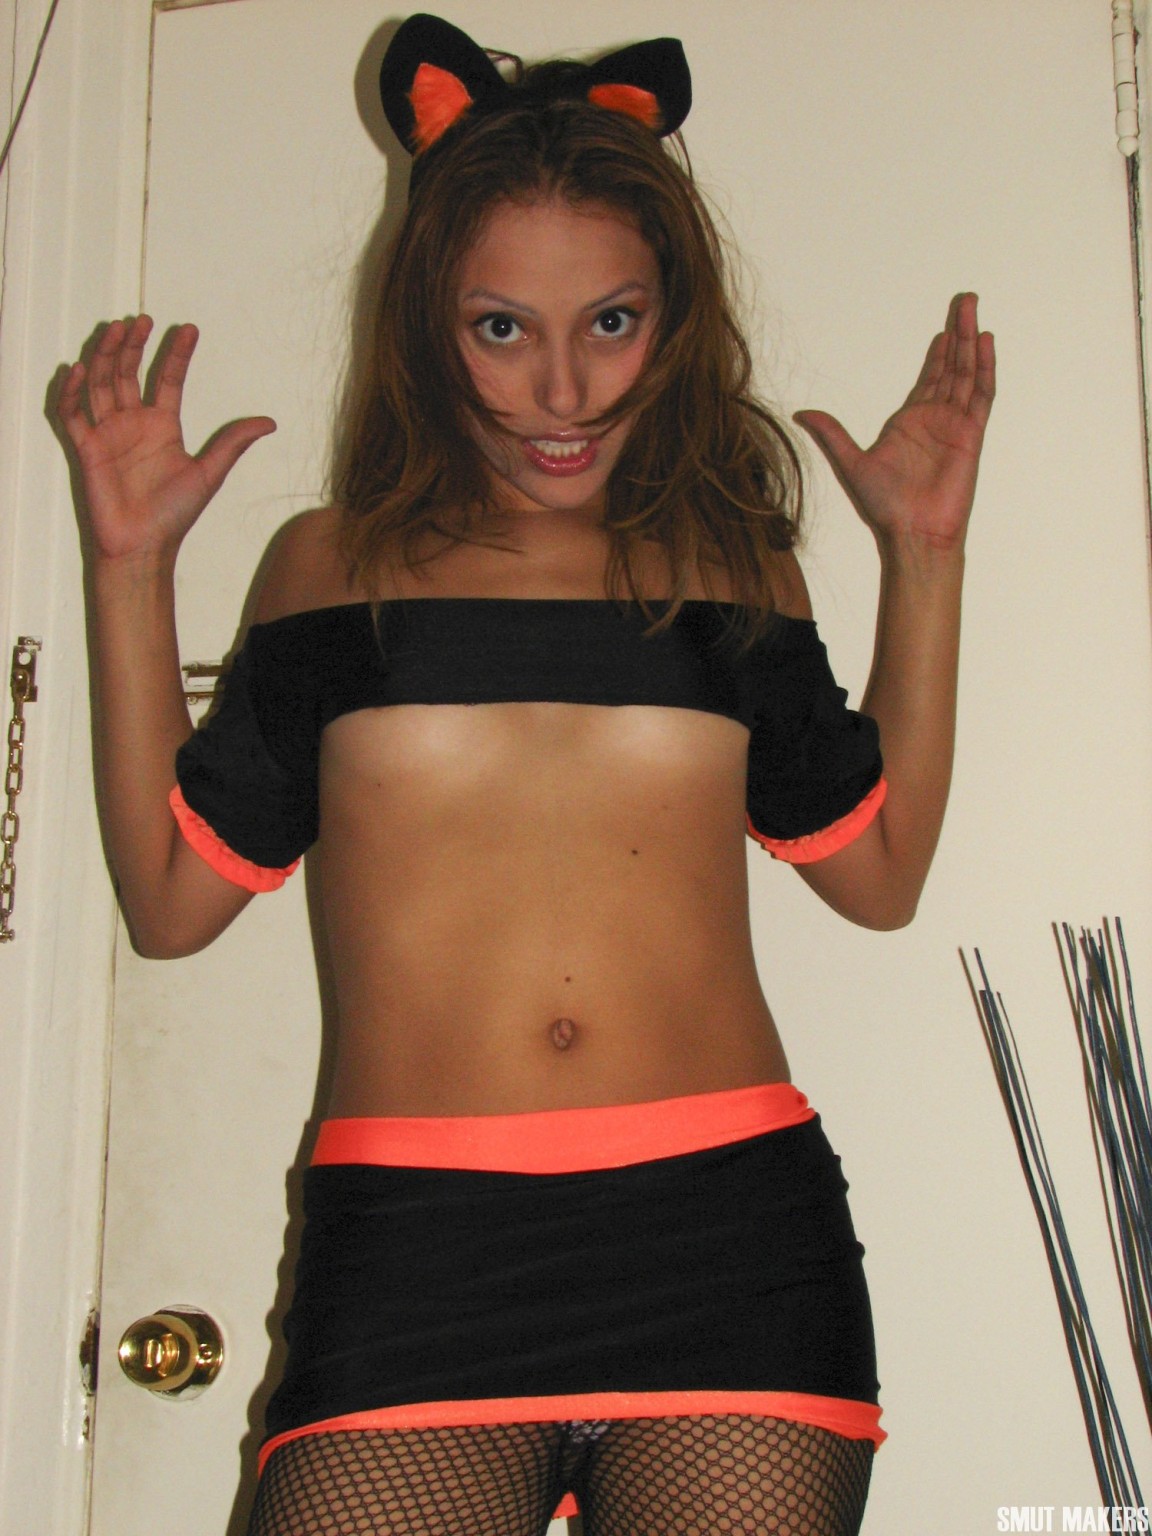 Smut Makes presents a naughty teen in pussy costume for Halloween #67366140